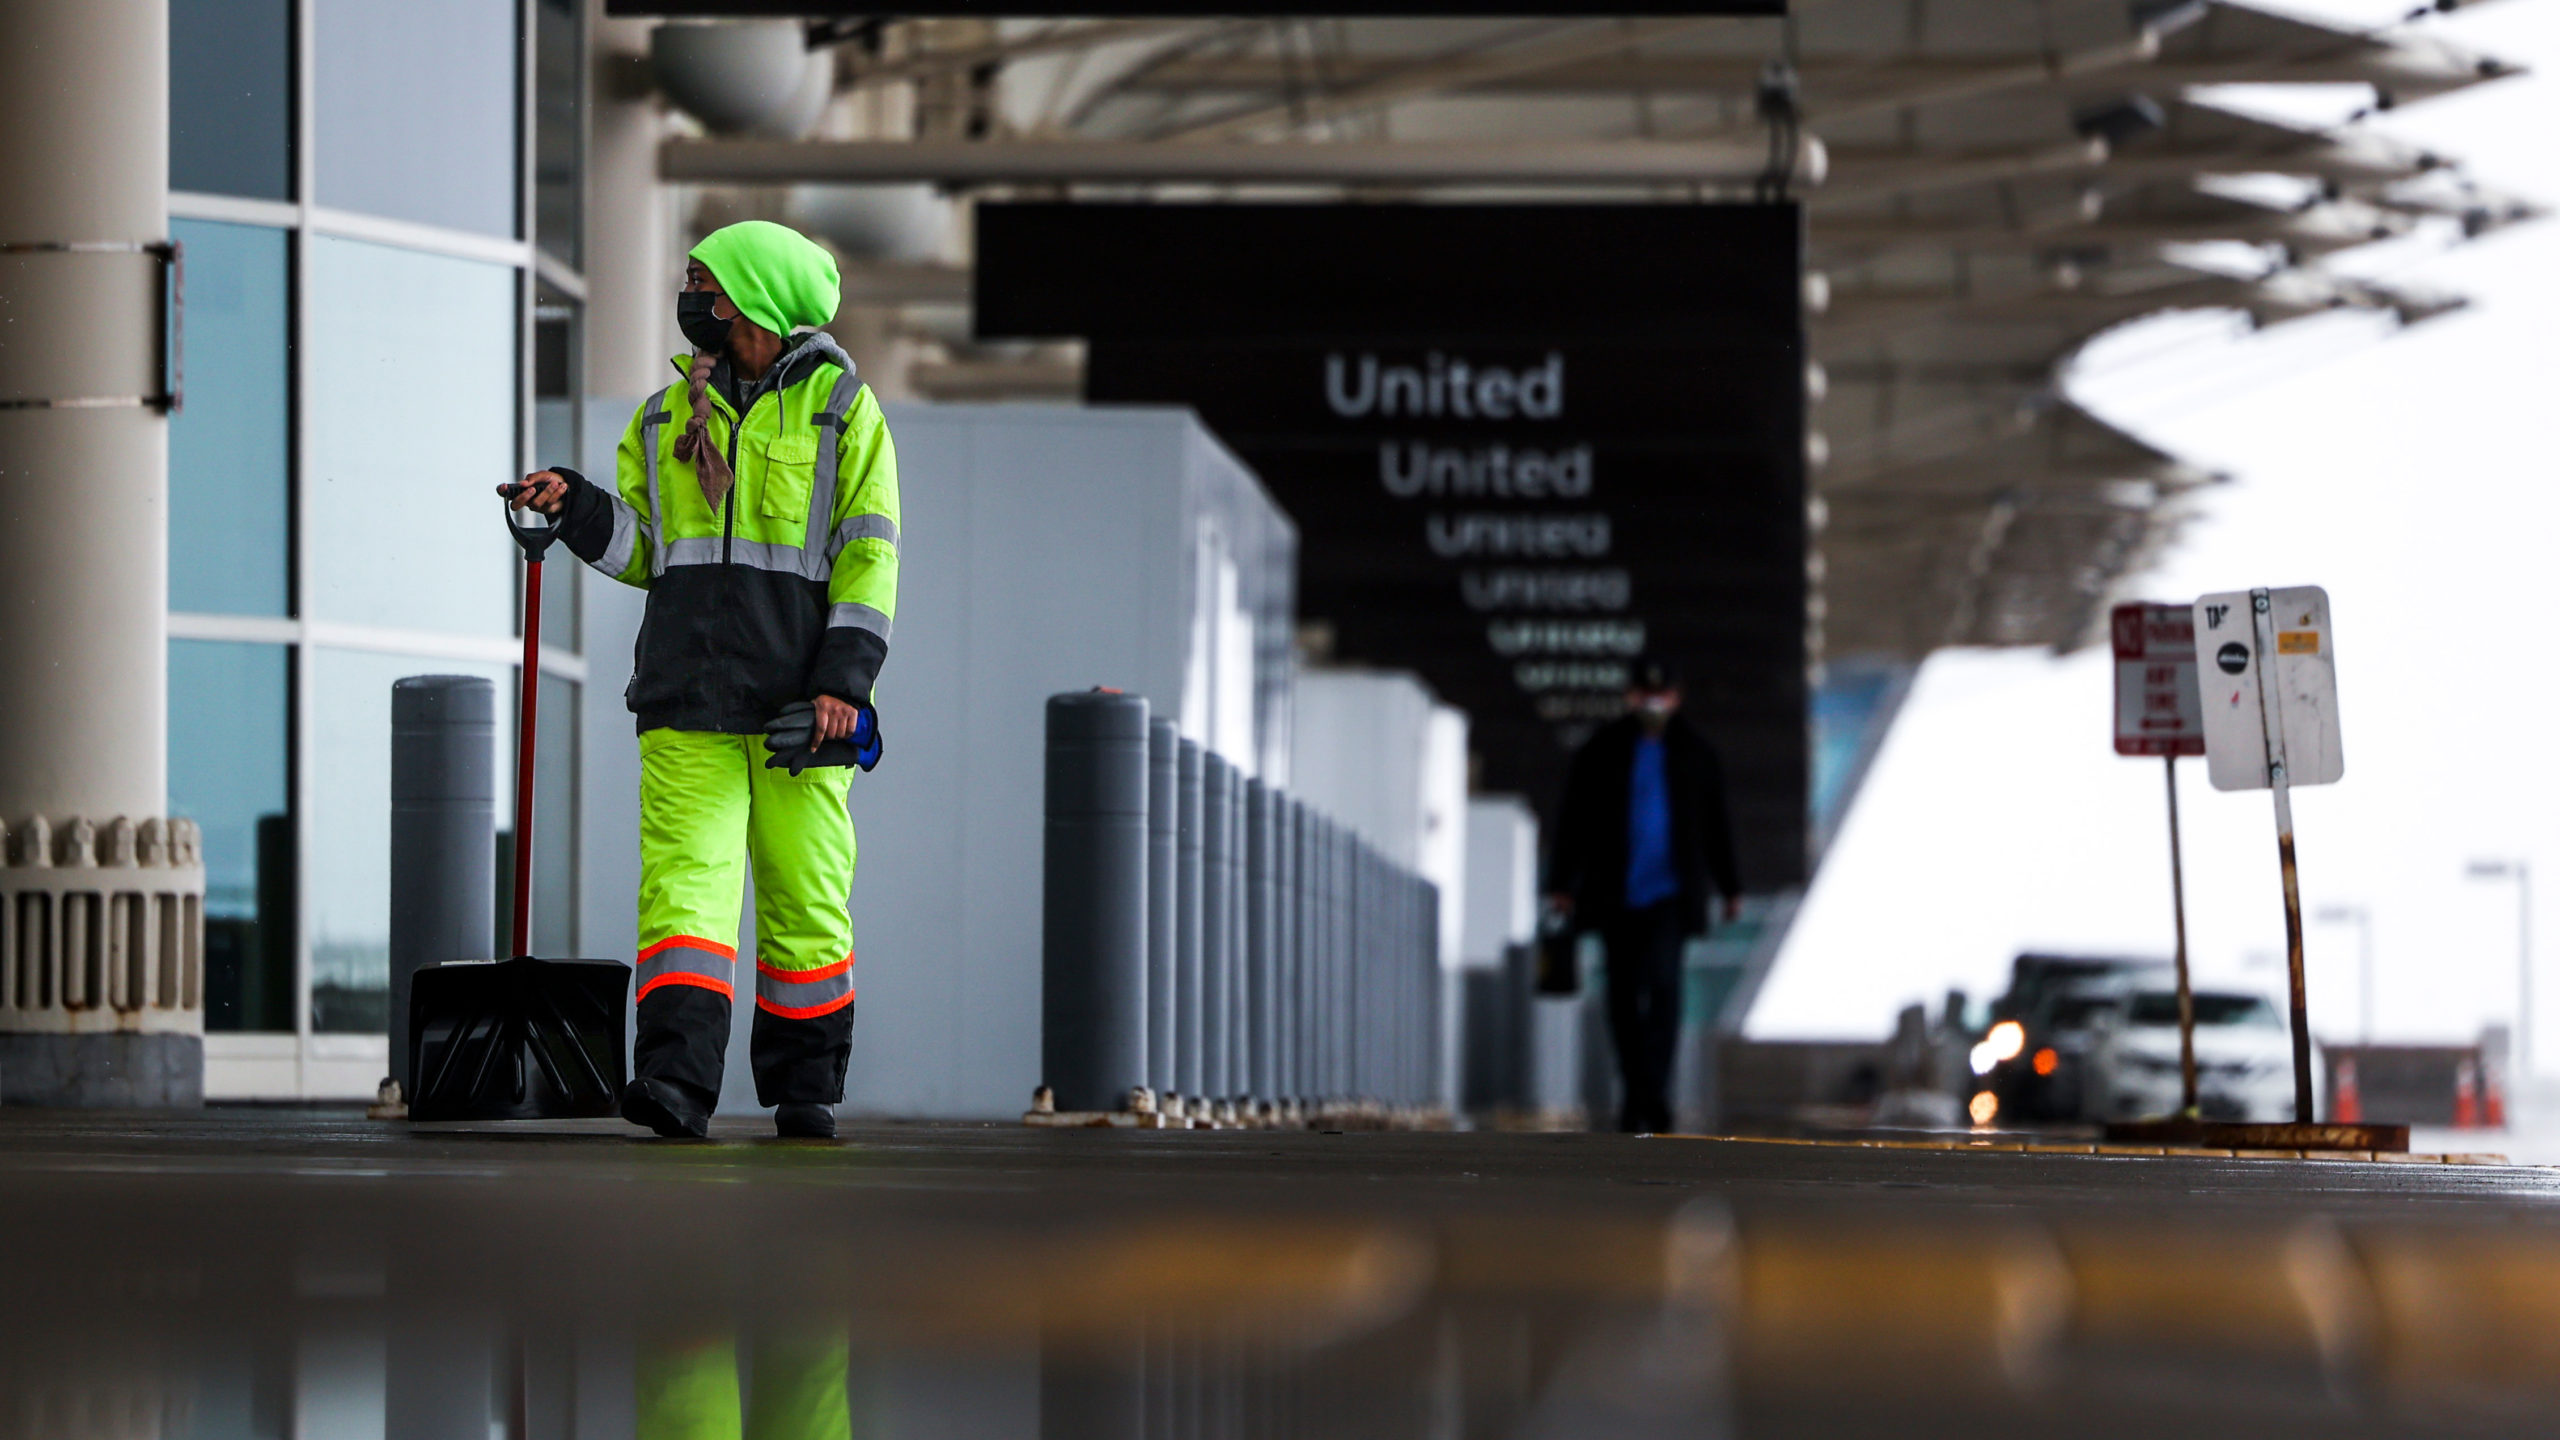  A Denver International Airport employee walks with a shovel in the passenger drop-off area on March 13, 2021 in Denver, Colorado.  (Photo: Michael Ciaglo, Getty Images)